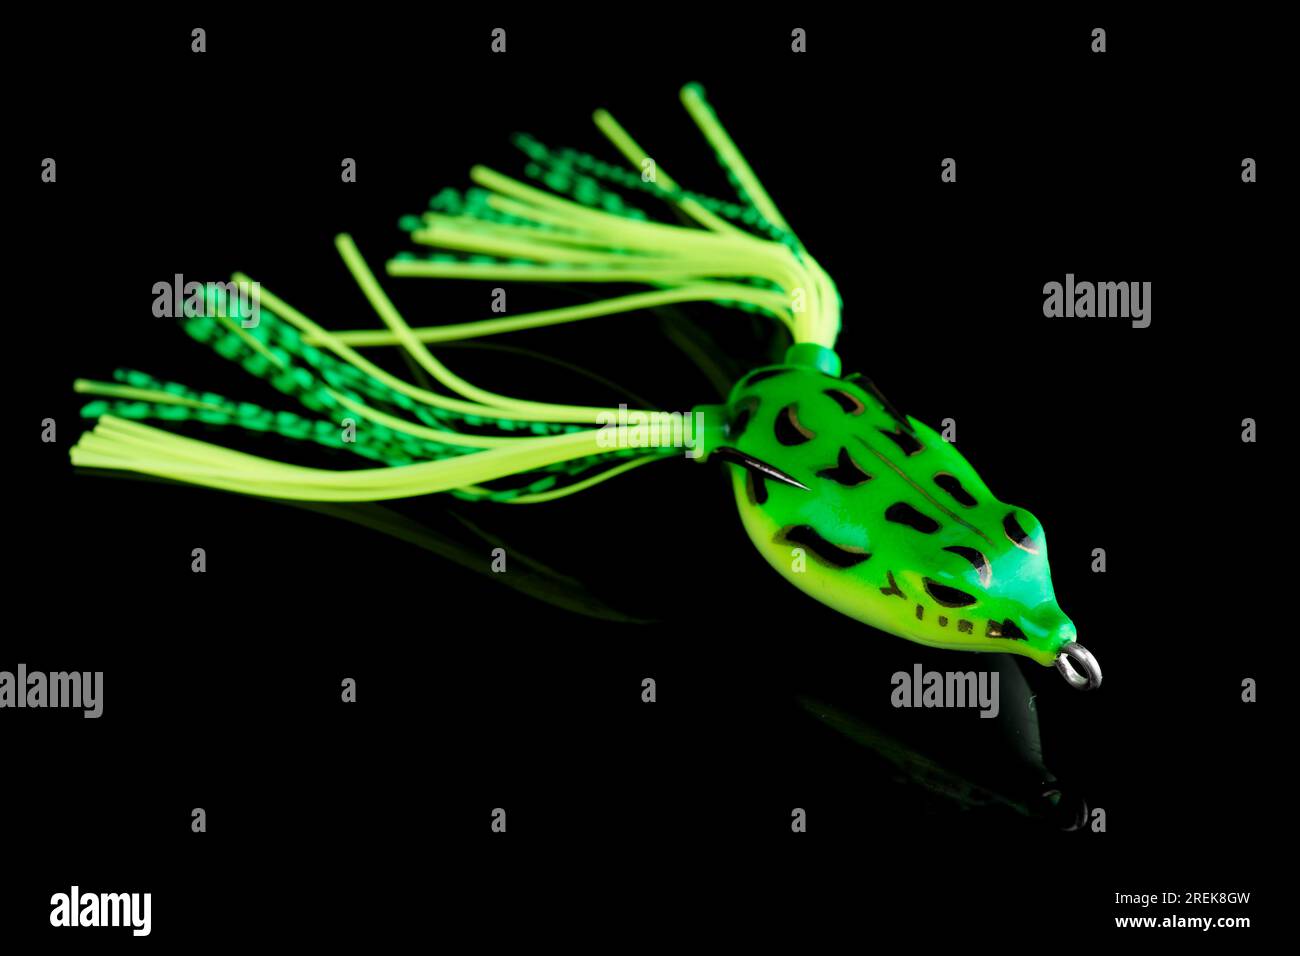 https://c8.alamy.com/comp/2REK8GW/silicone-frog-top-water-bait-for-pike-or-large-mouth-bass-fishing-isolated-on-black-background-2REK8GW.jpg